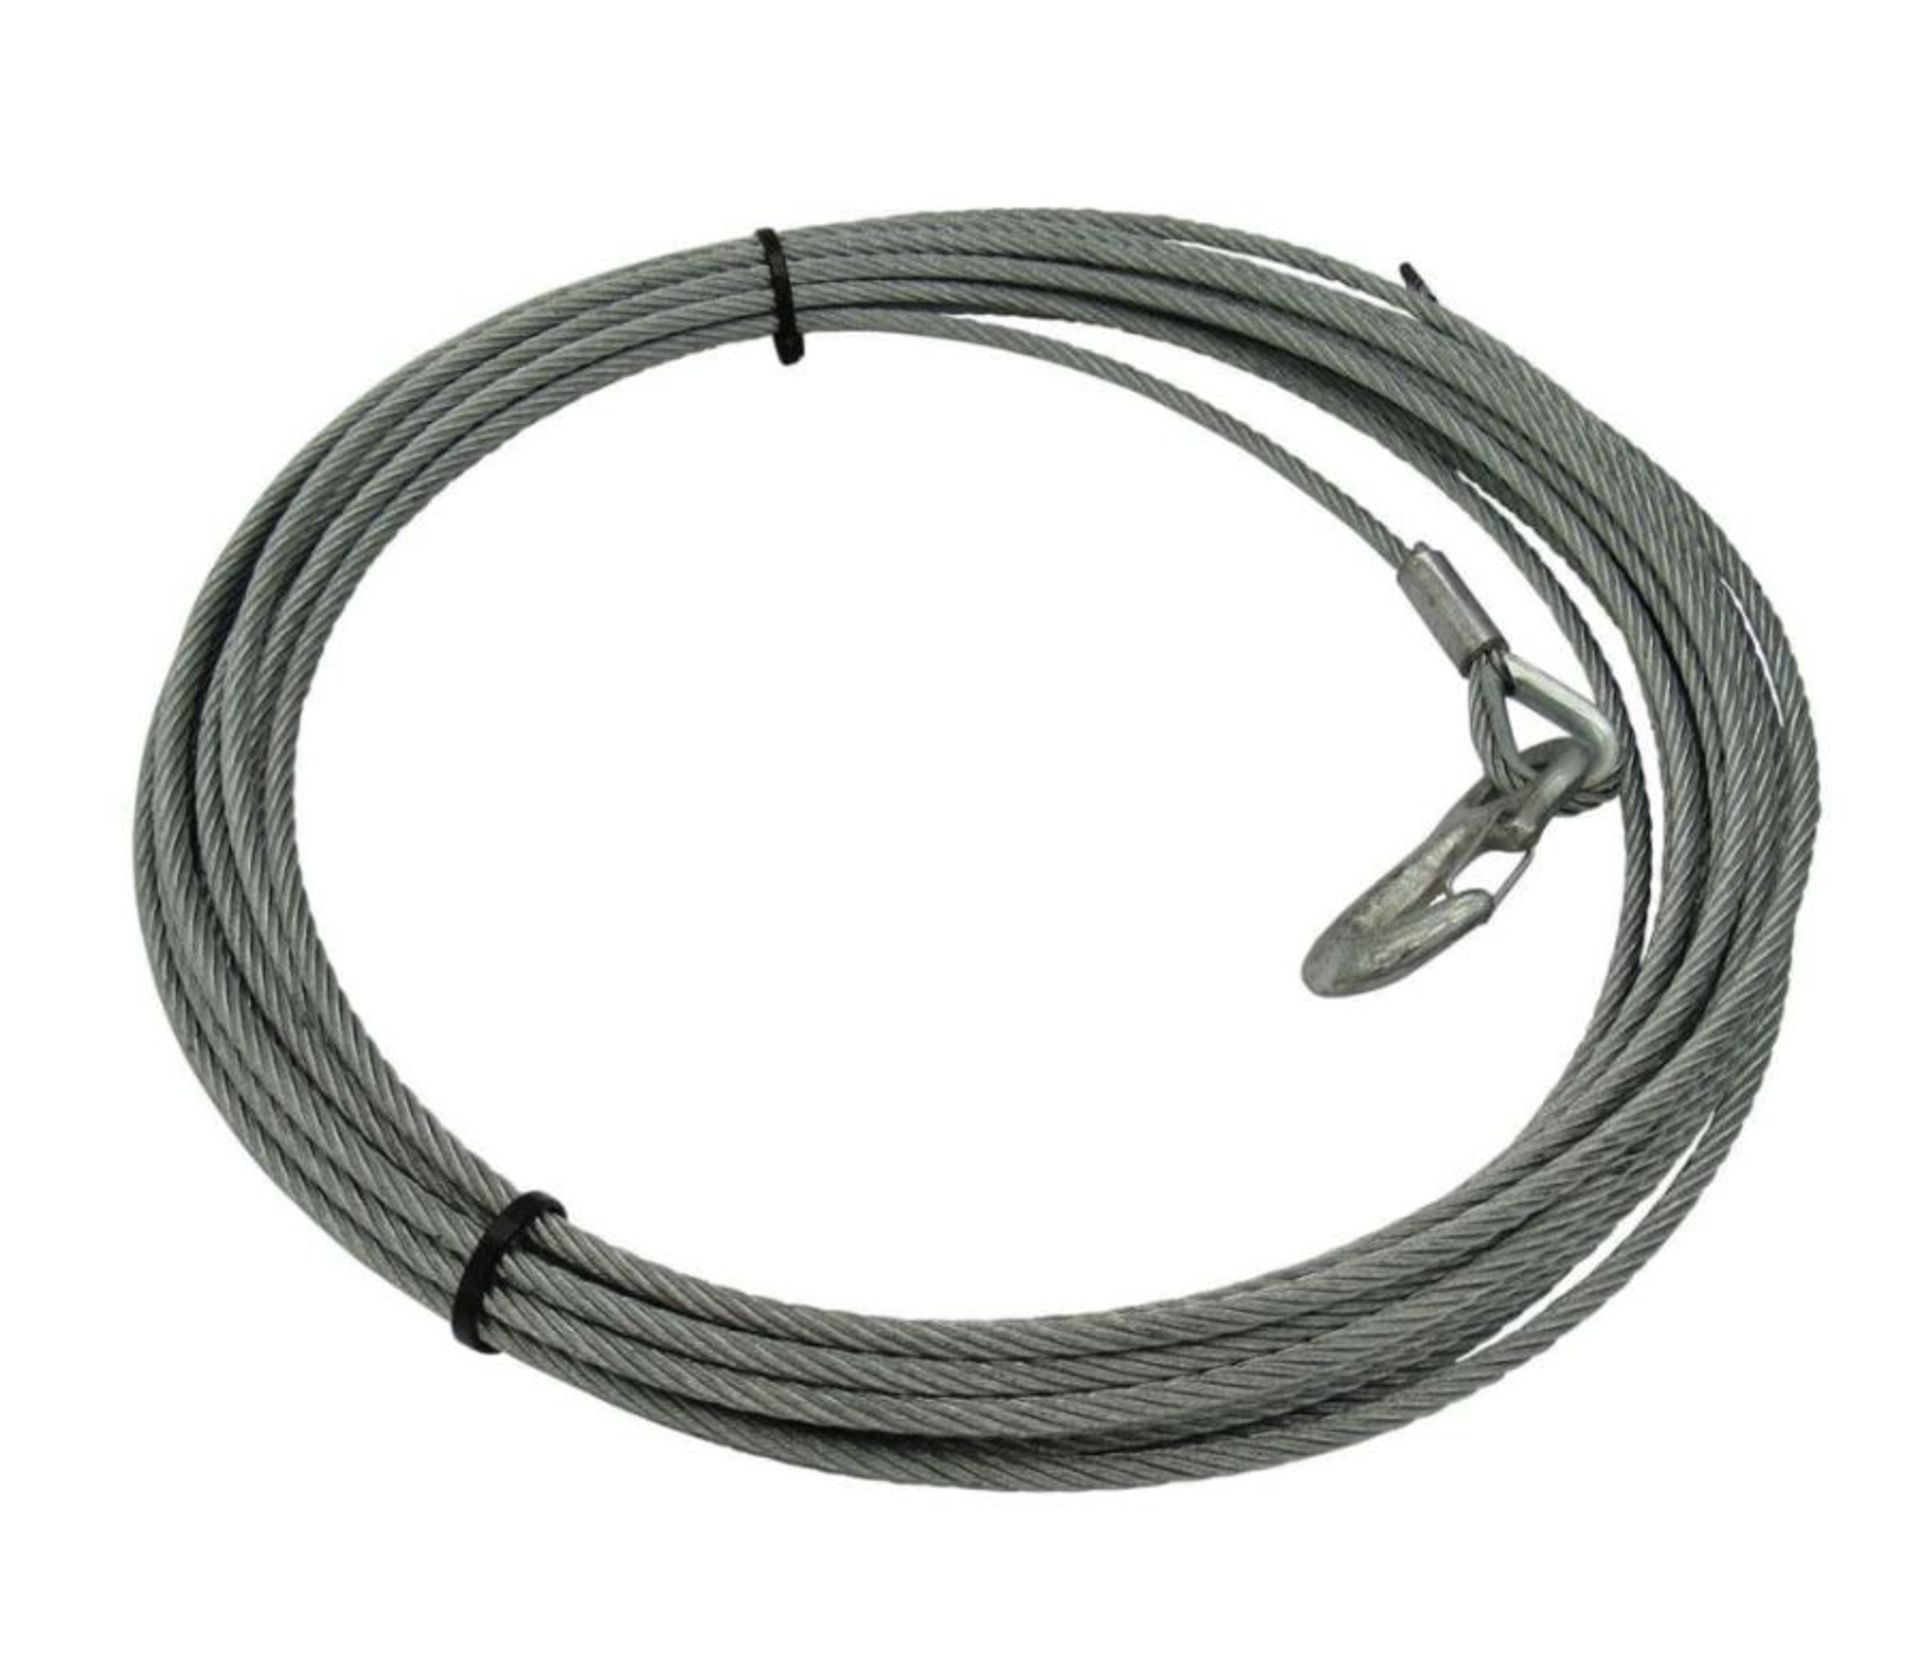 4 X 6mm X 15Mtr Galvanised Hand Winch Cable With Hook (Not For Lifting) (Hwc6)